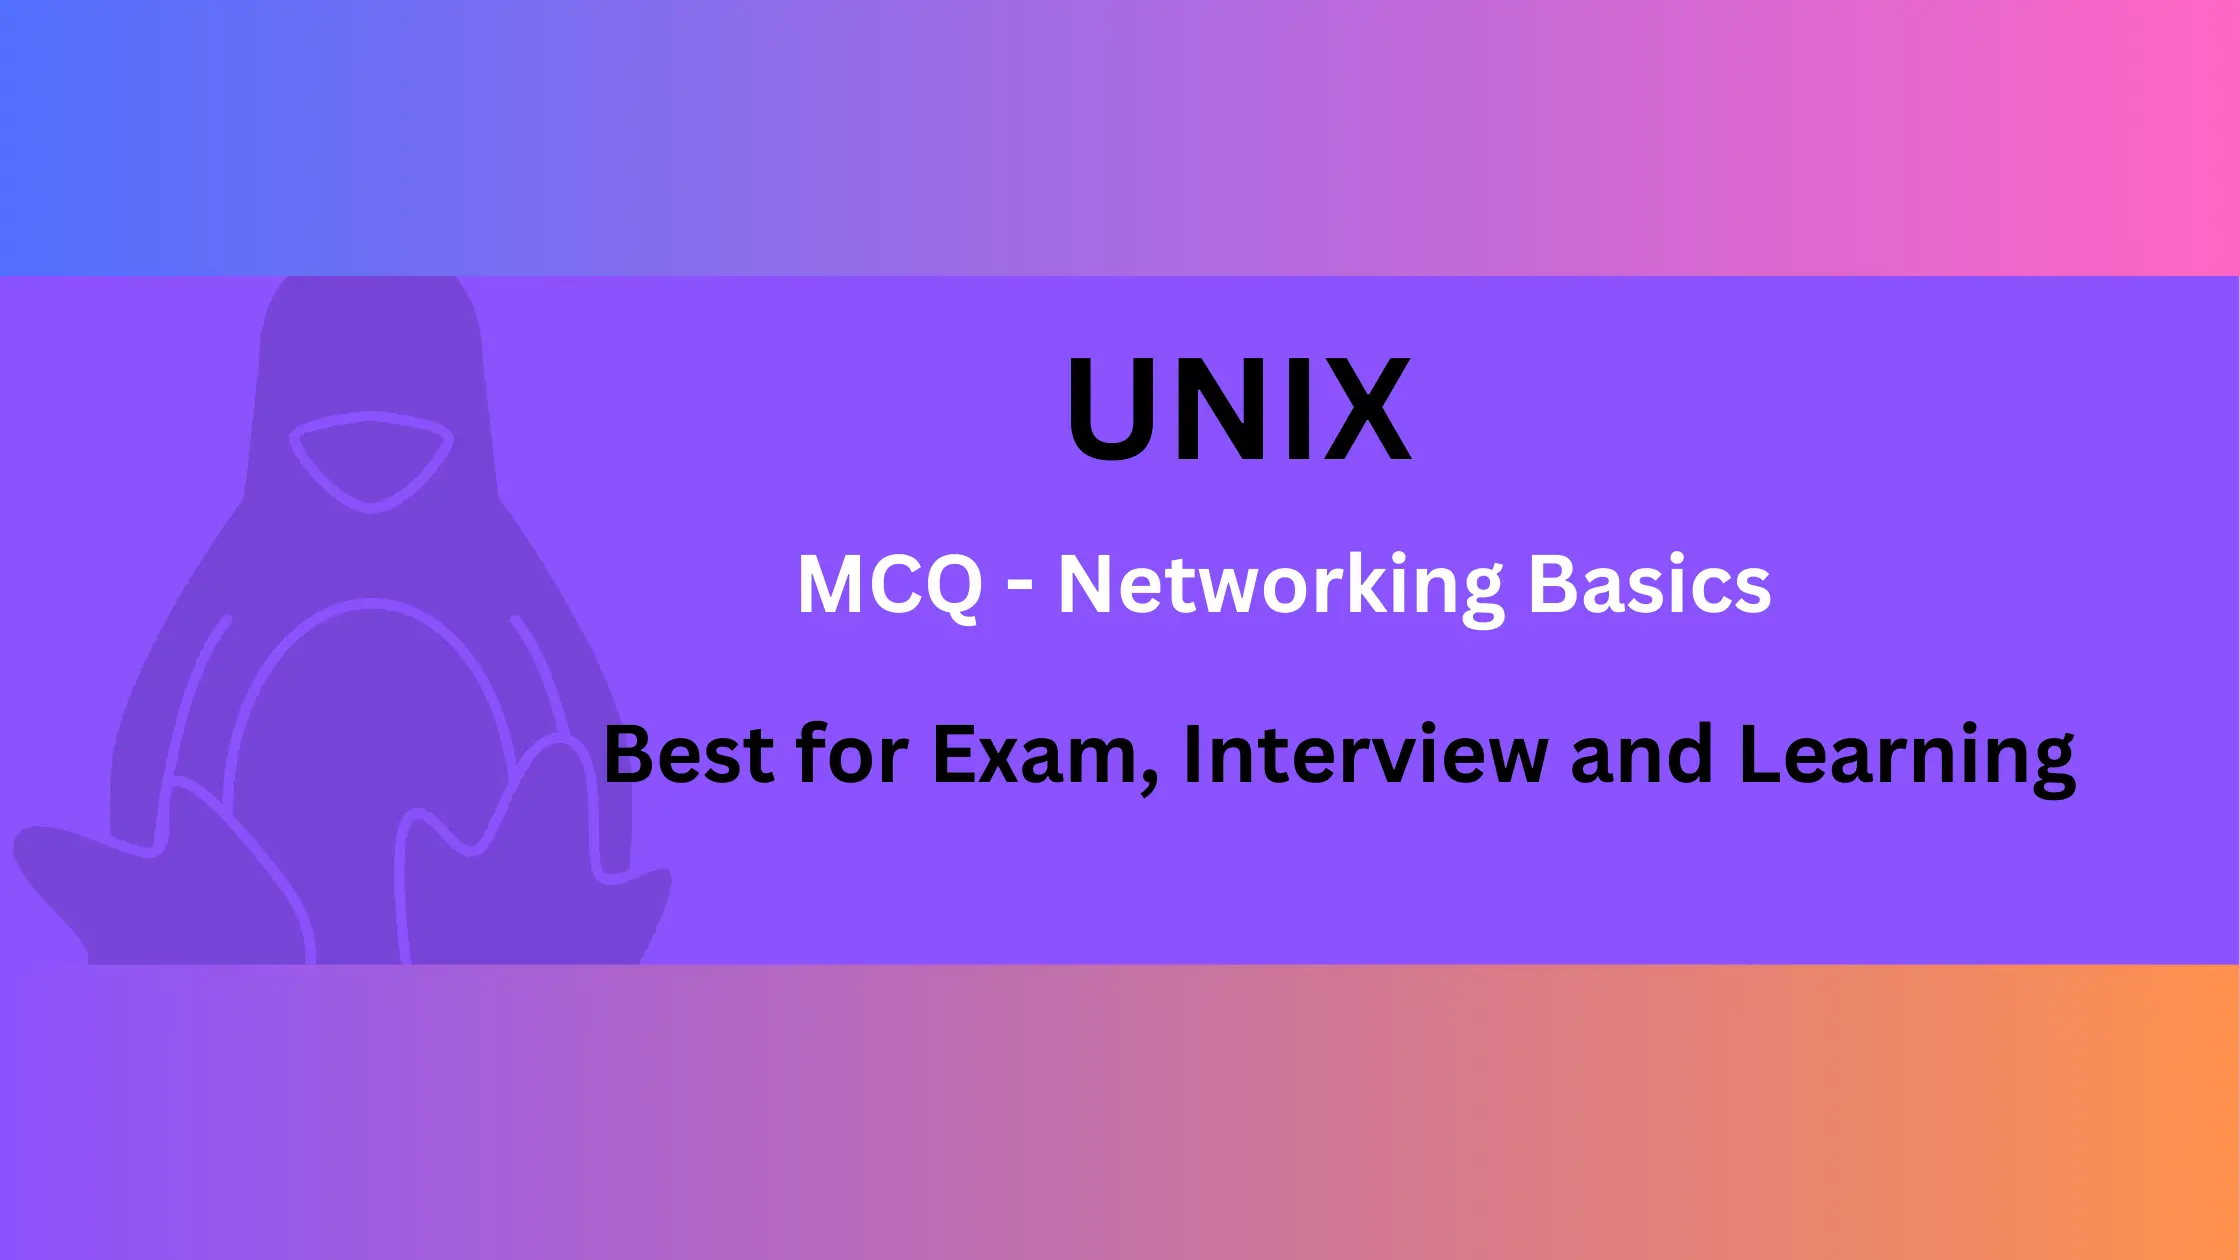 UNIX mcq questions and answers for Networking Basics